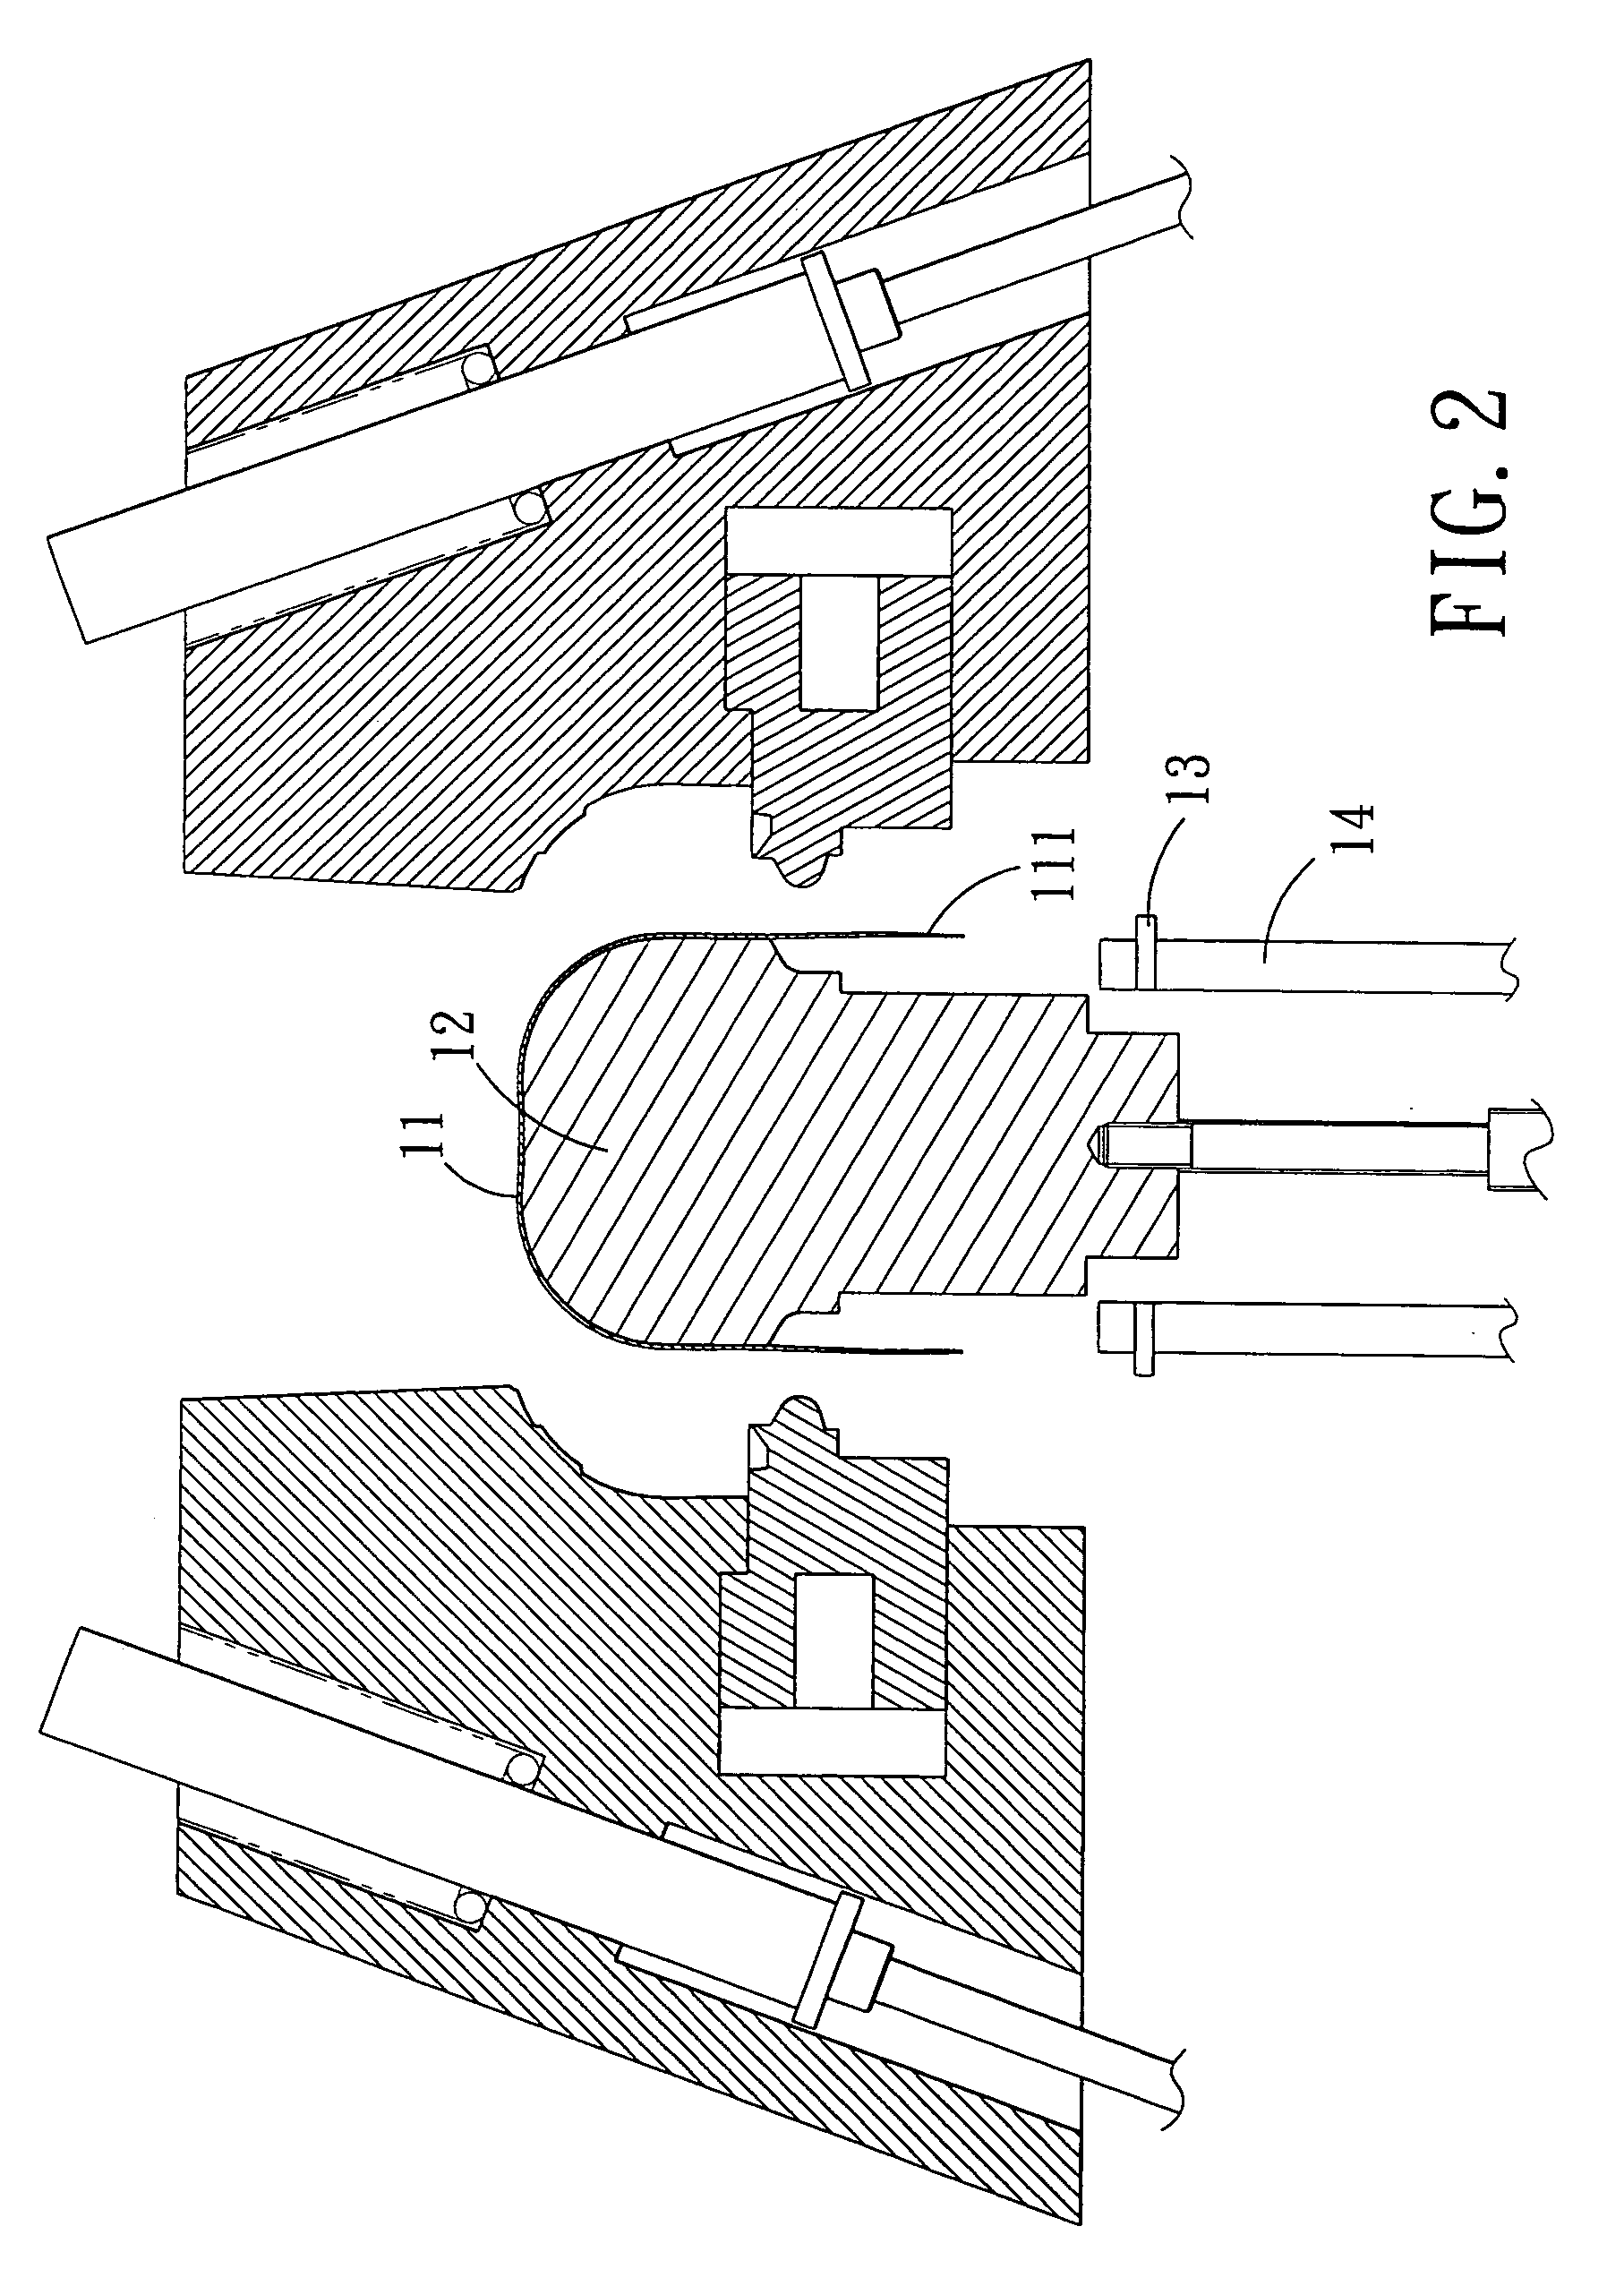 Method for injection molding a solid pattern onto a shoe upper